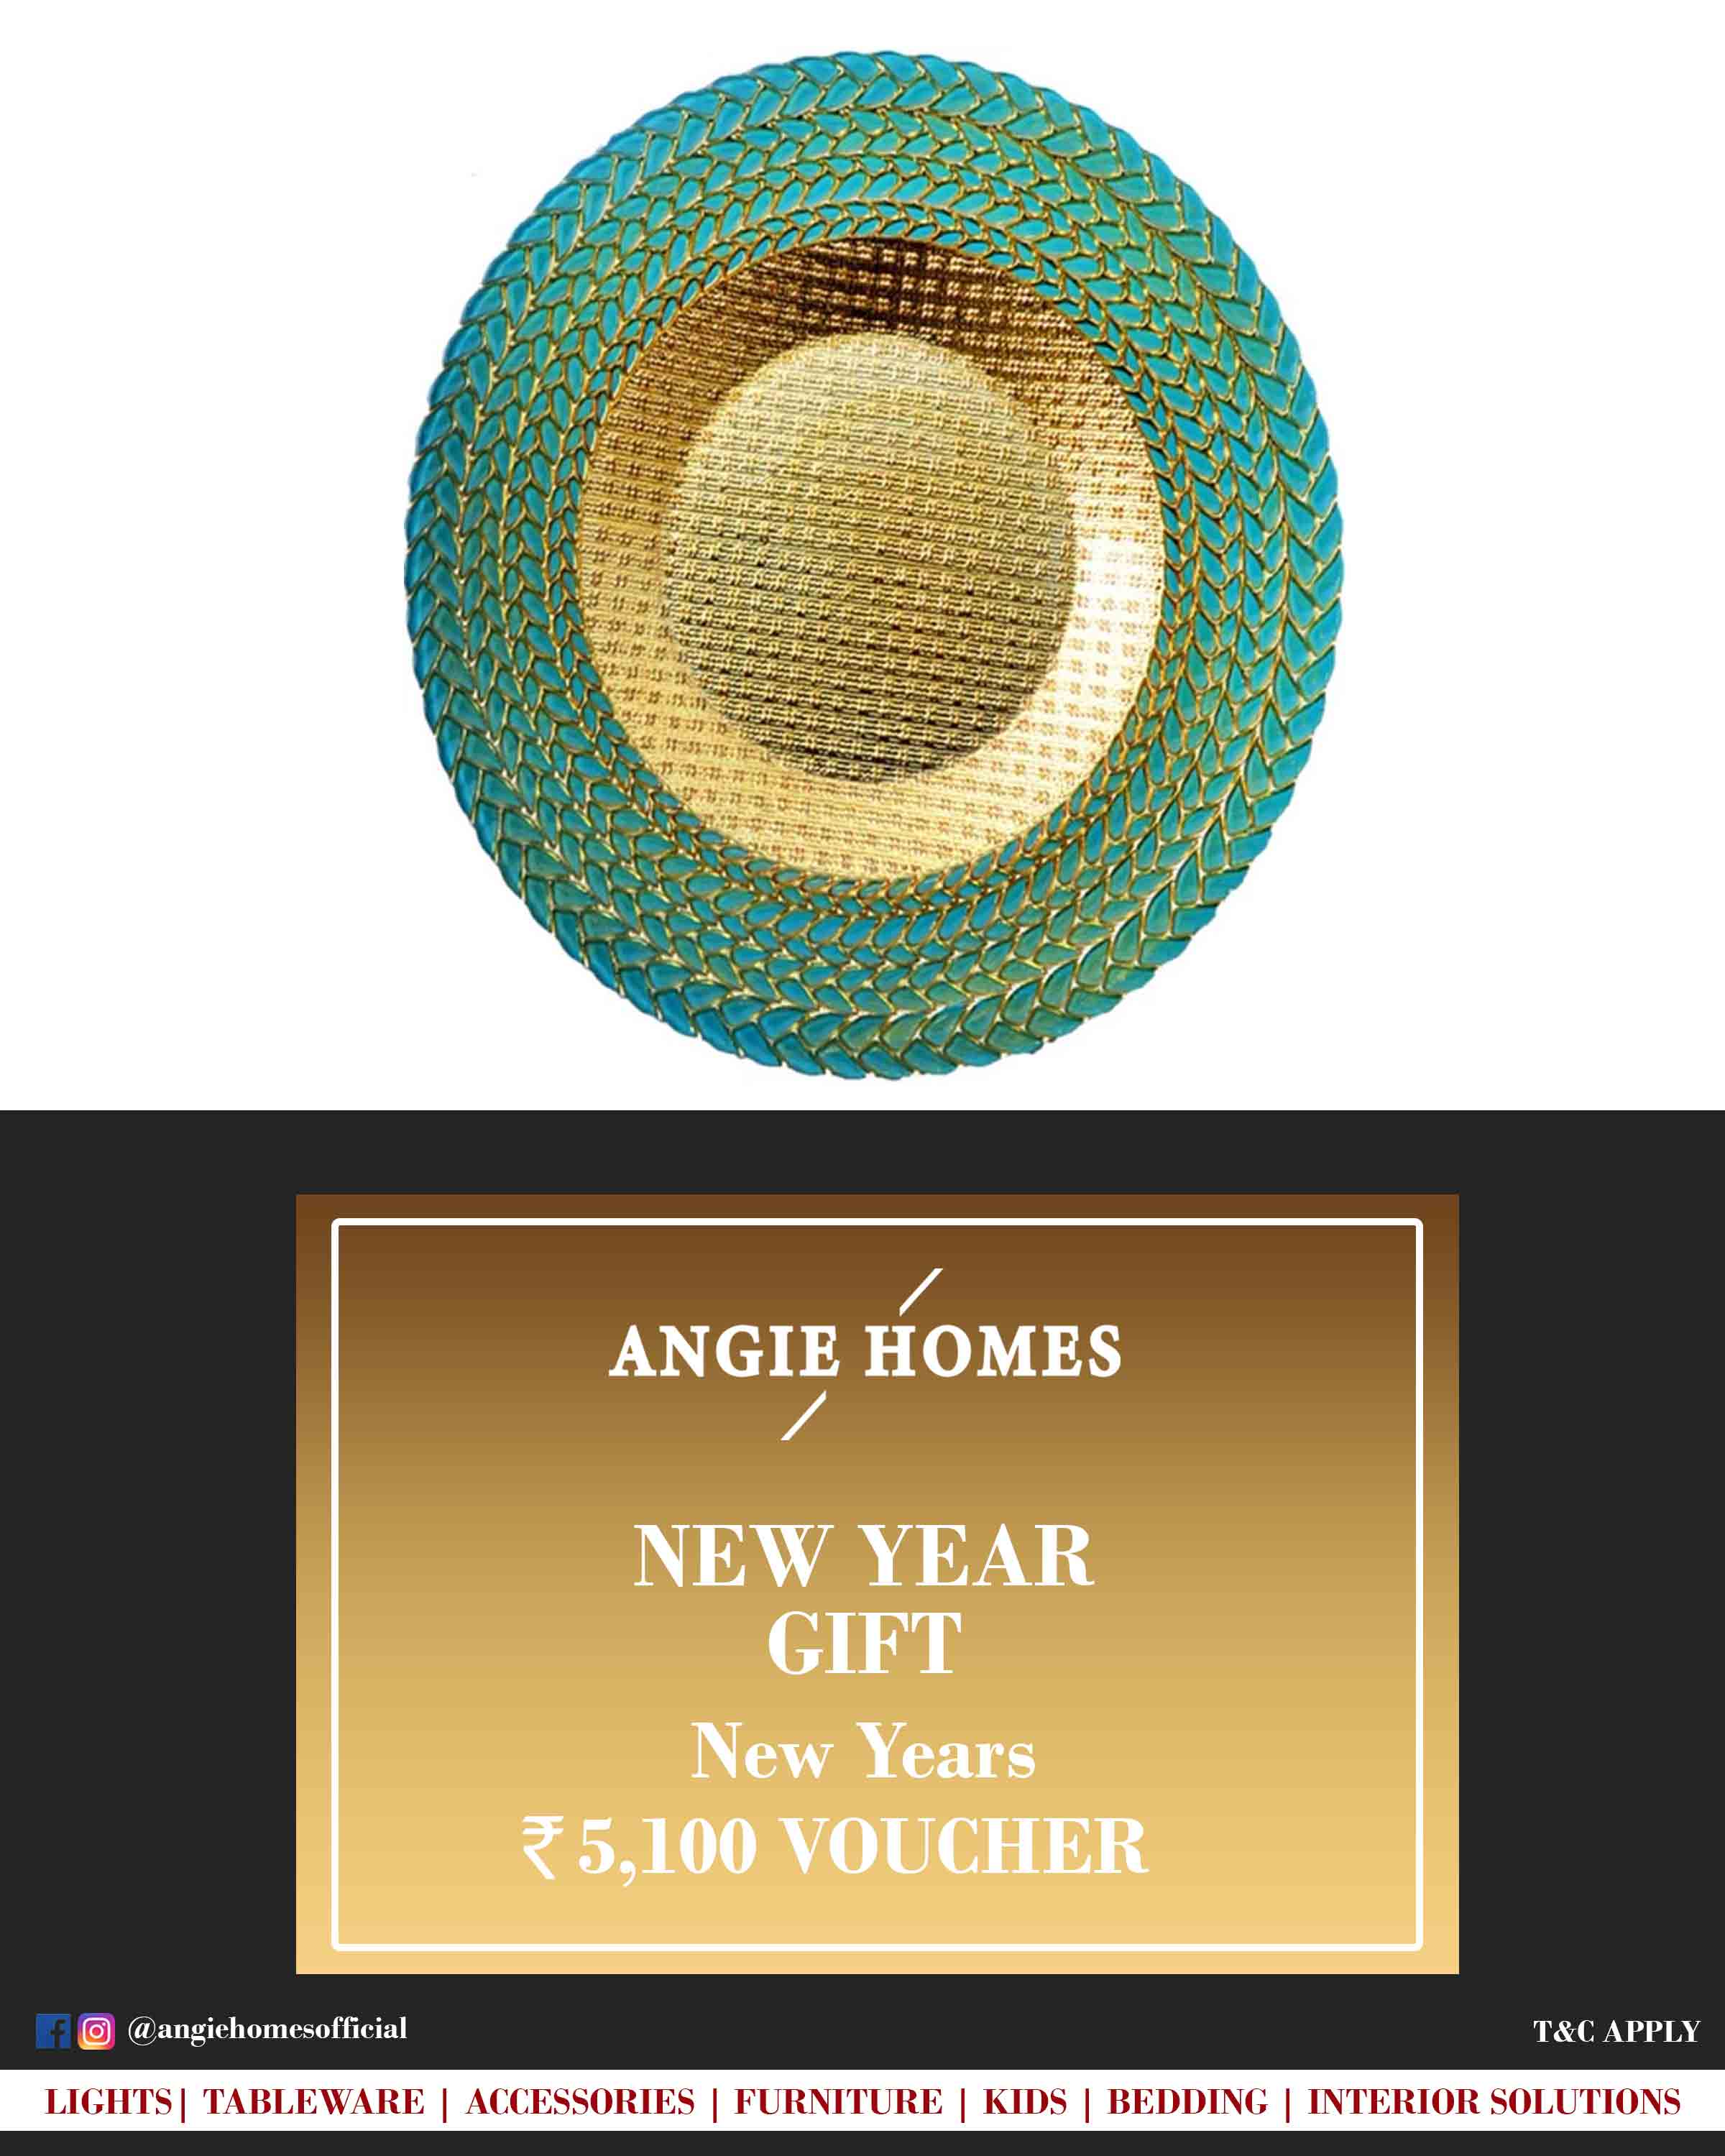 Online New Year Gift Voucher for Tableware | Green Plates ANGIE HOMES